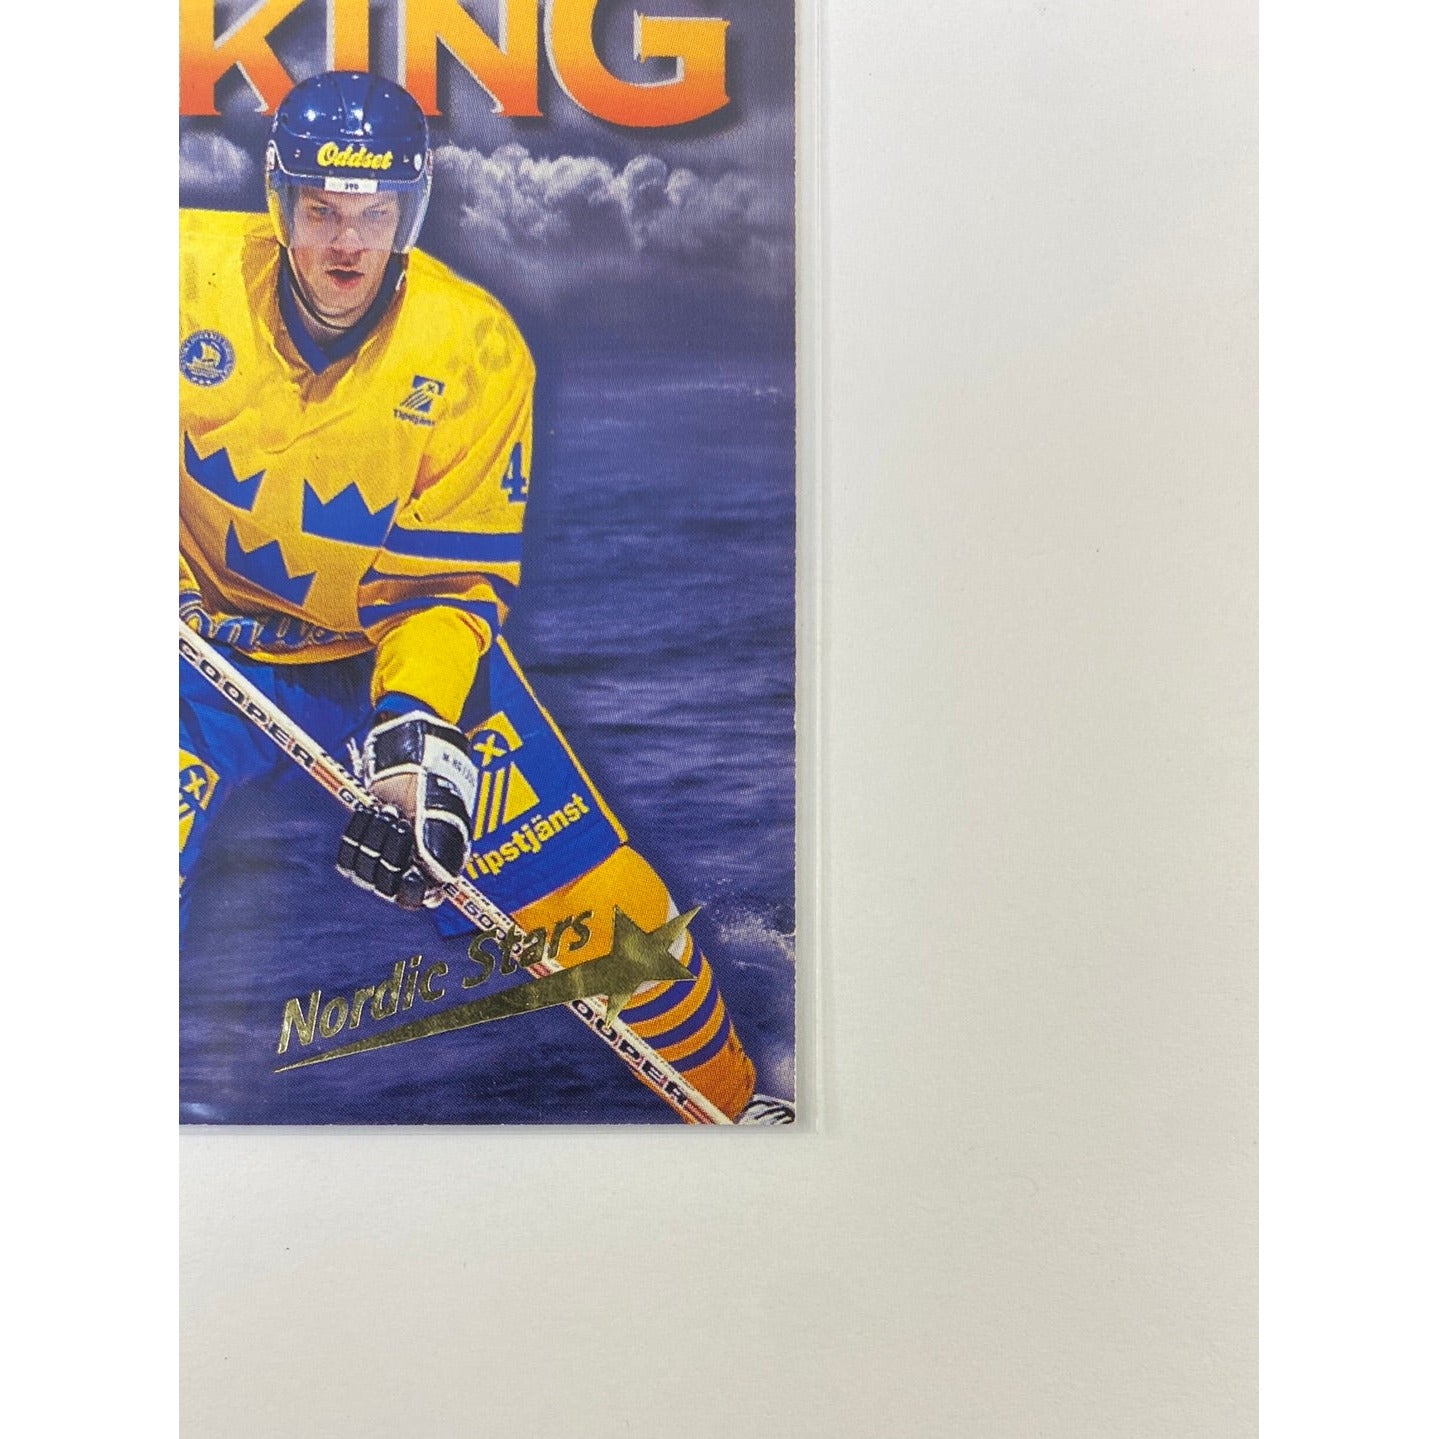 1996 Wein Semic Collections Nicklas Lidstrom The Mighty Viking Nordic Stars SSP